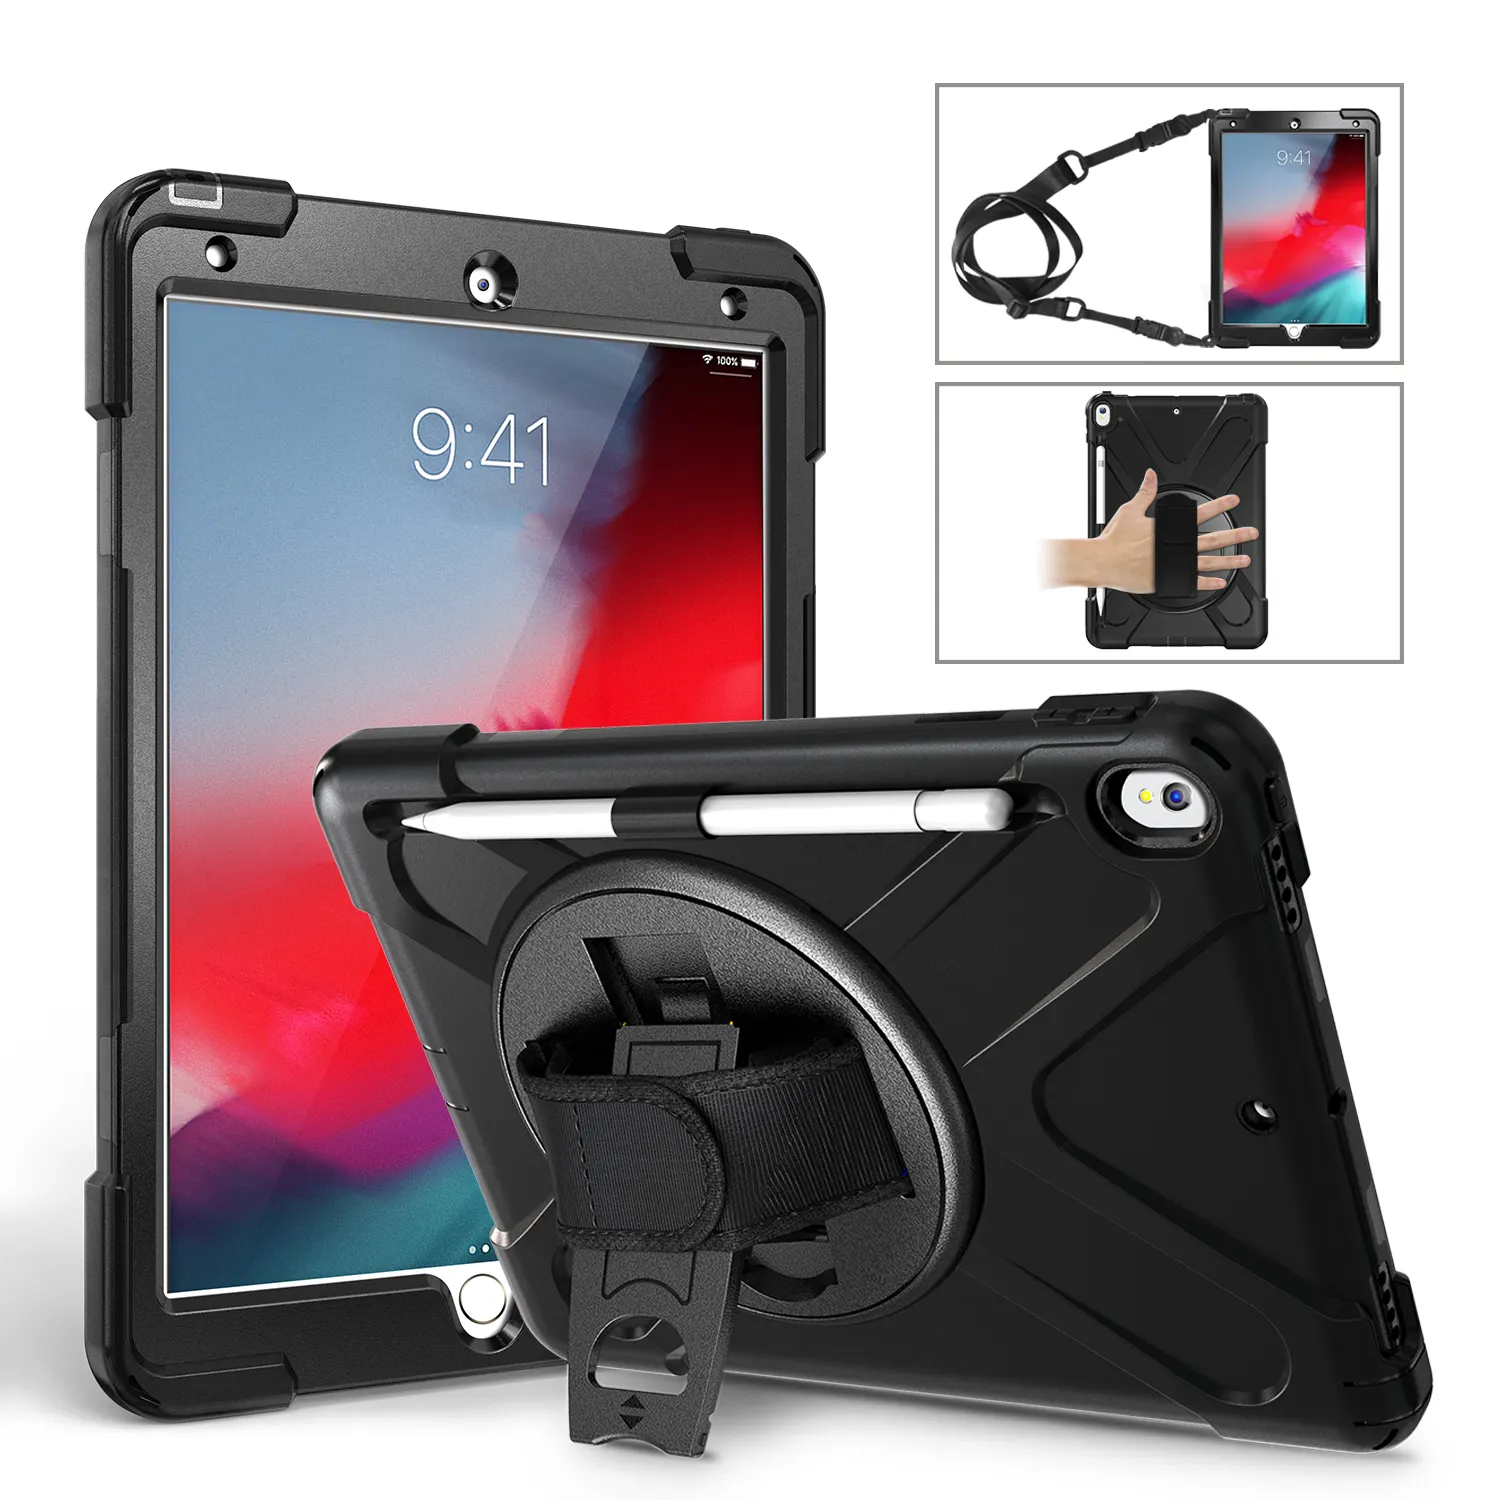 For iPad Air 3/Pro 10.5 inch Full-Body Shockproof armor 360 Rotating kickstand hand shoulder strap sturdy rugged defender case